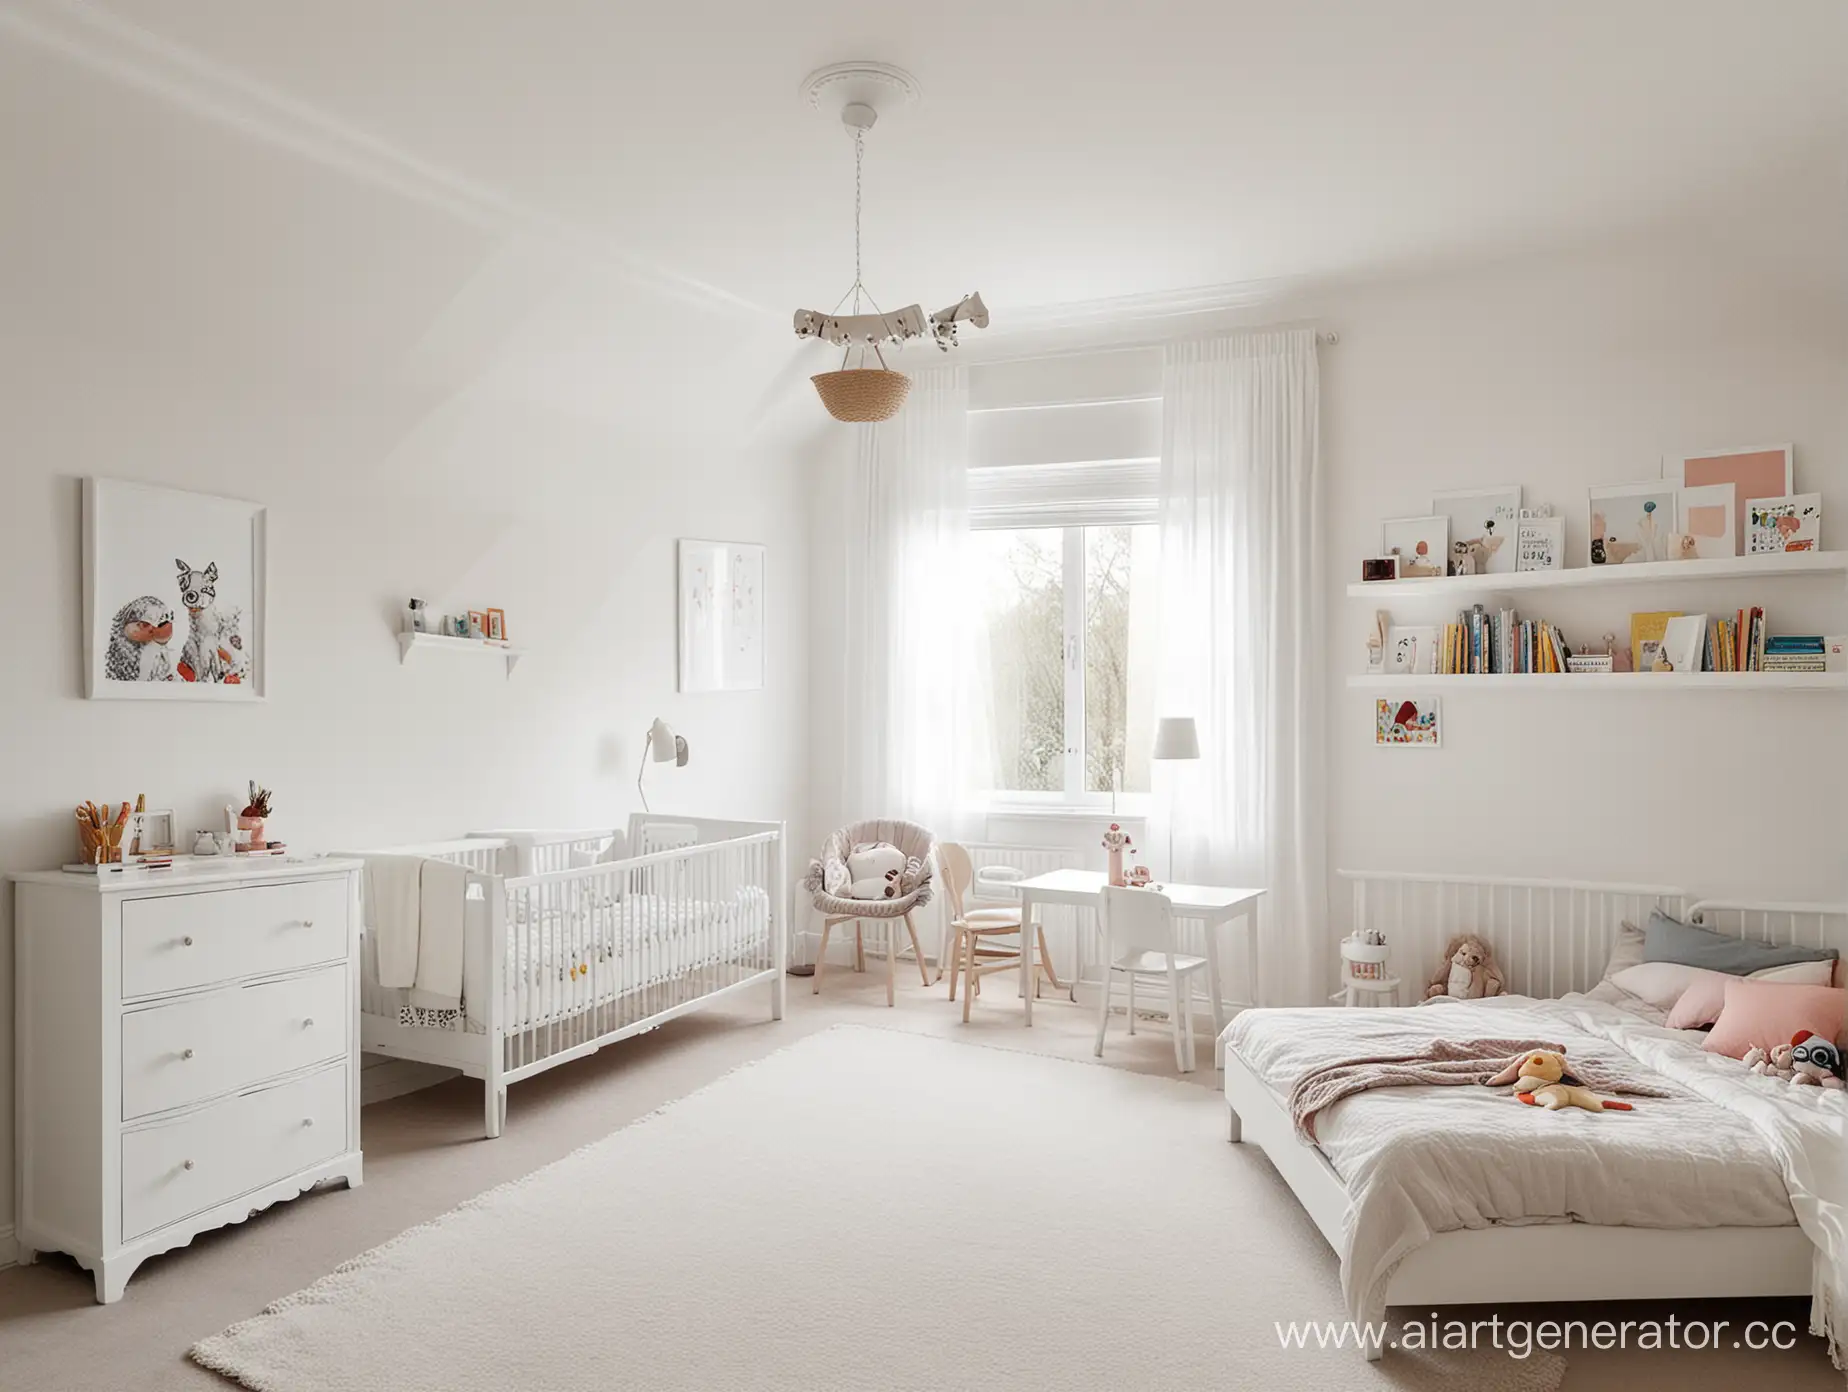 Joyful-Brother-and-Sister-in-Their-Bright-Childrens-Room-at-Dawn